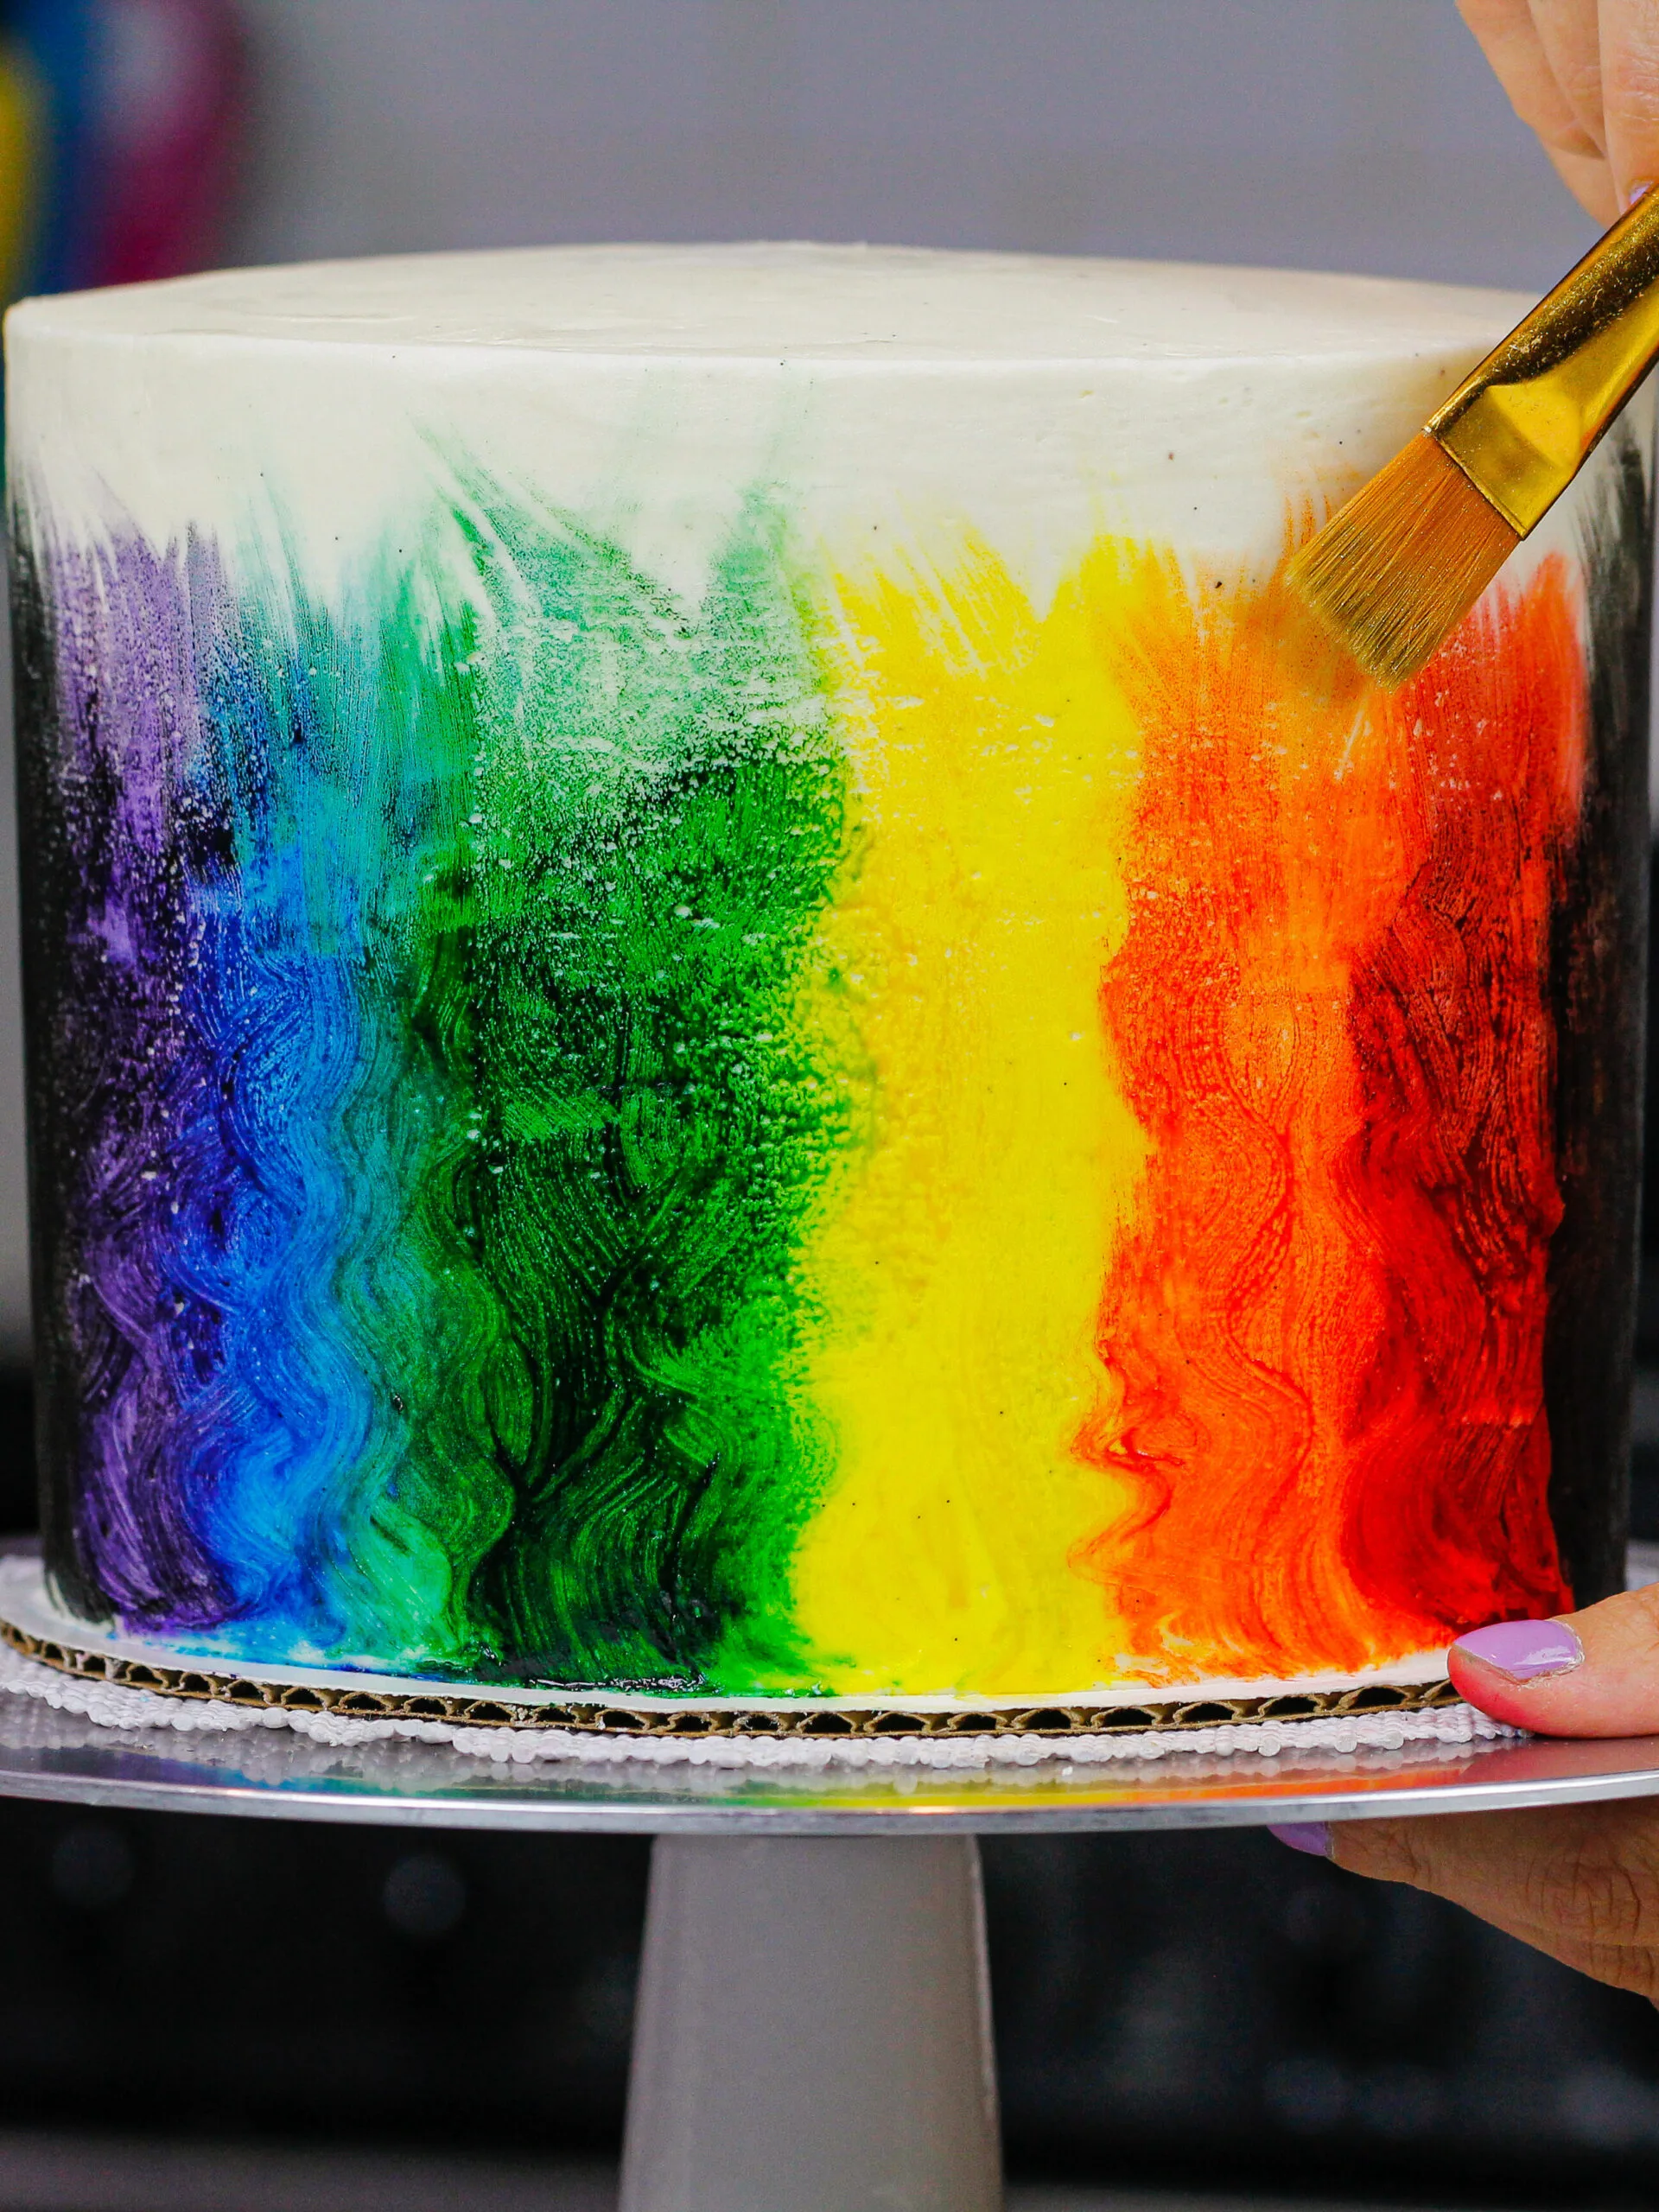 image of pride cake being painted rainbow colors with edible paint made from vodka and gel food coloring.